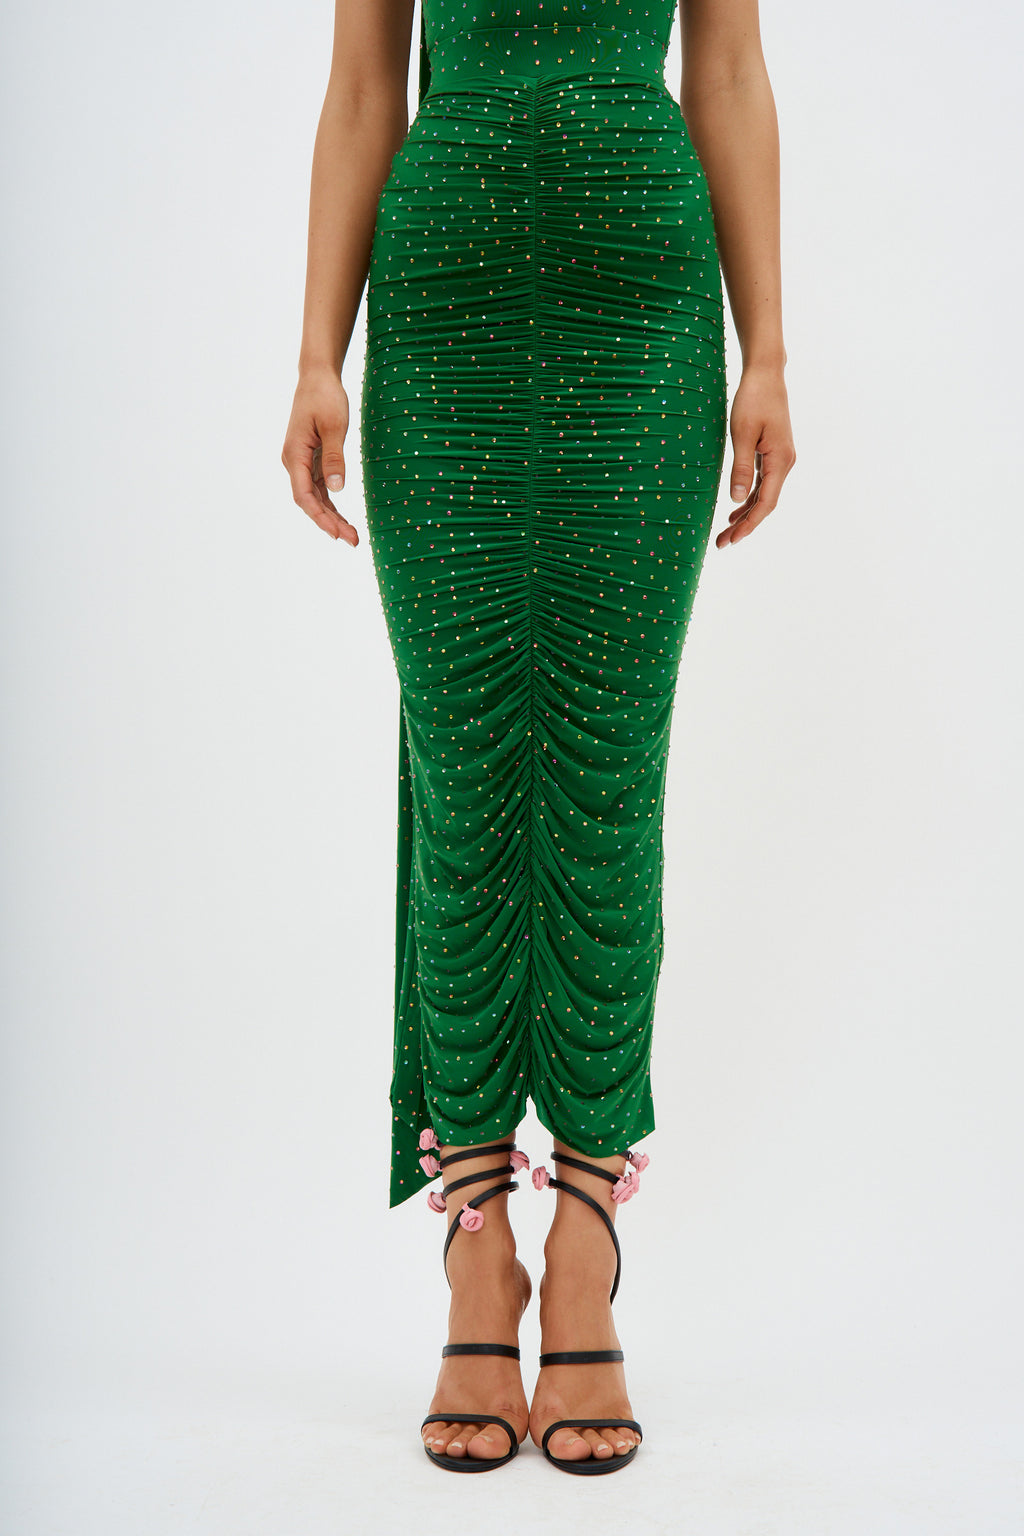 Ruched Crystal Jersey Emerald Skirt